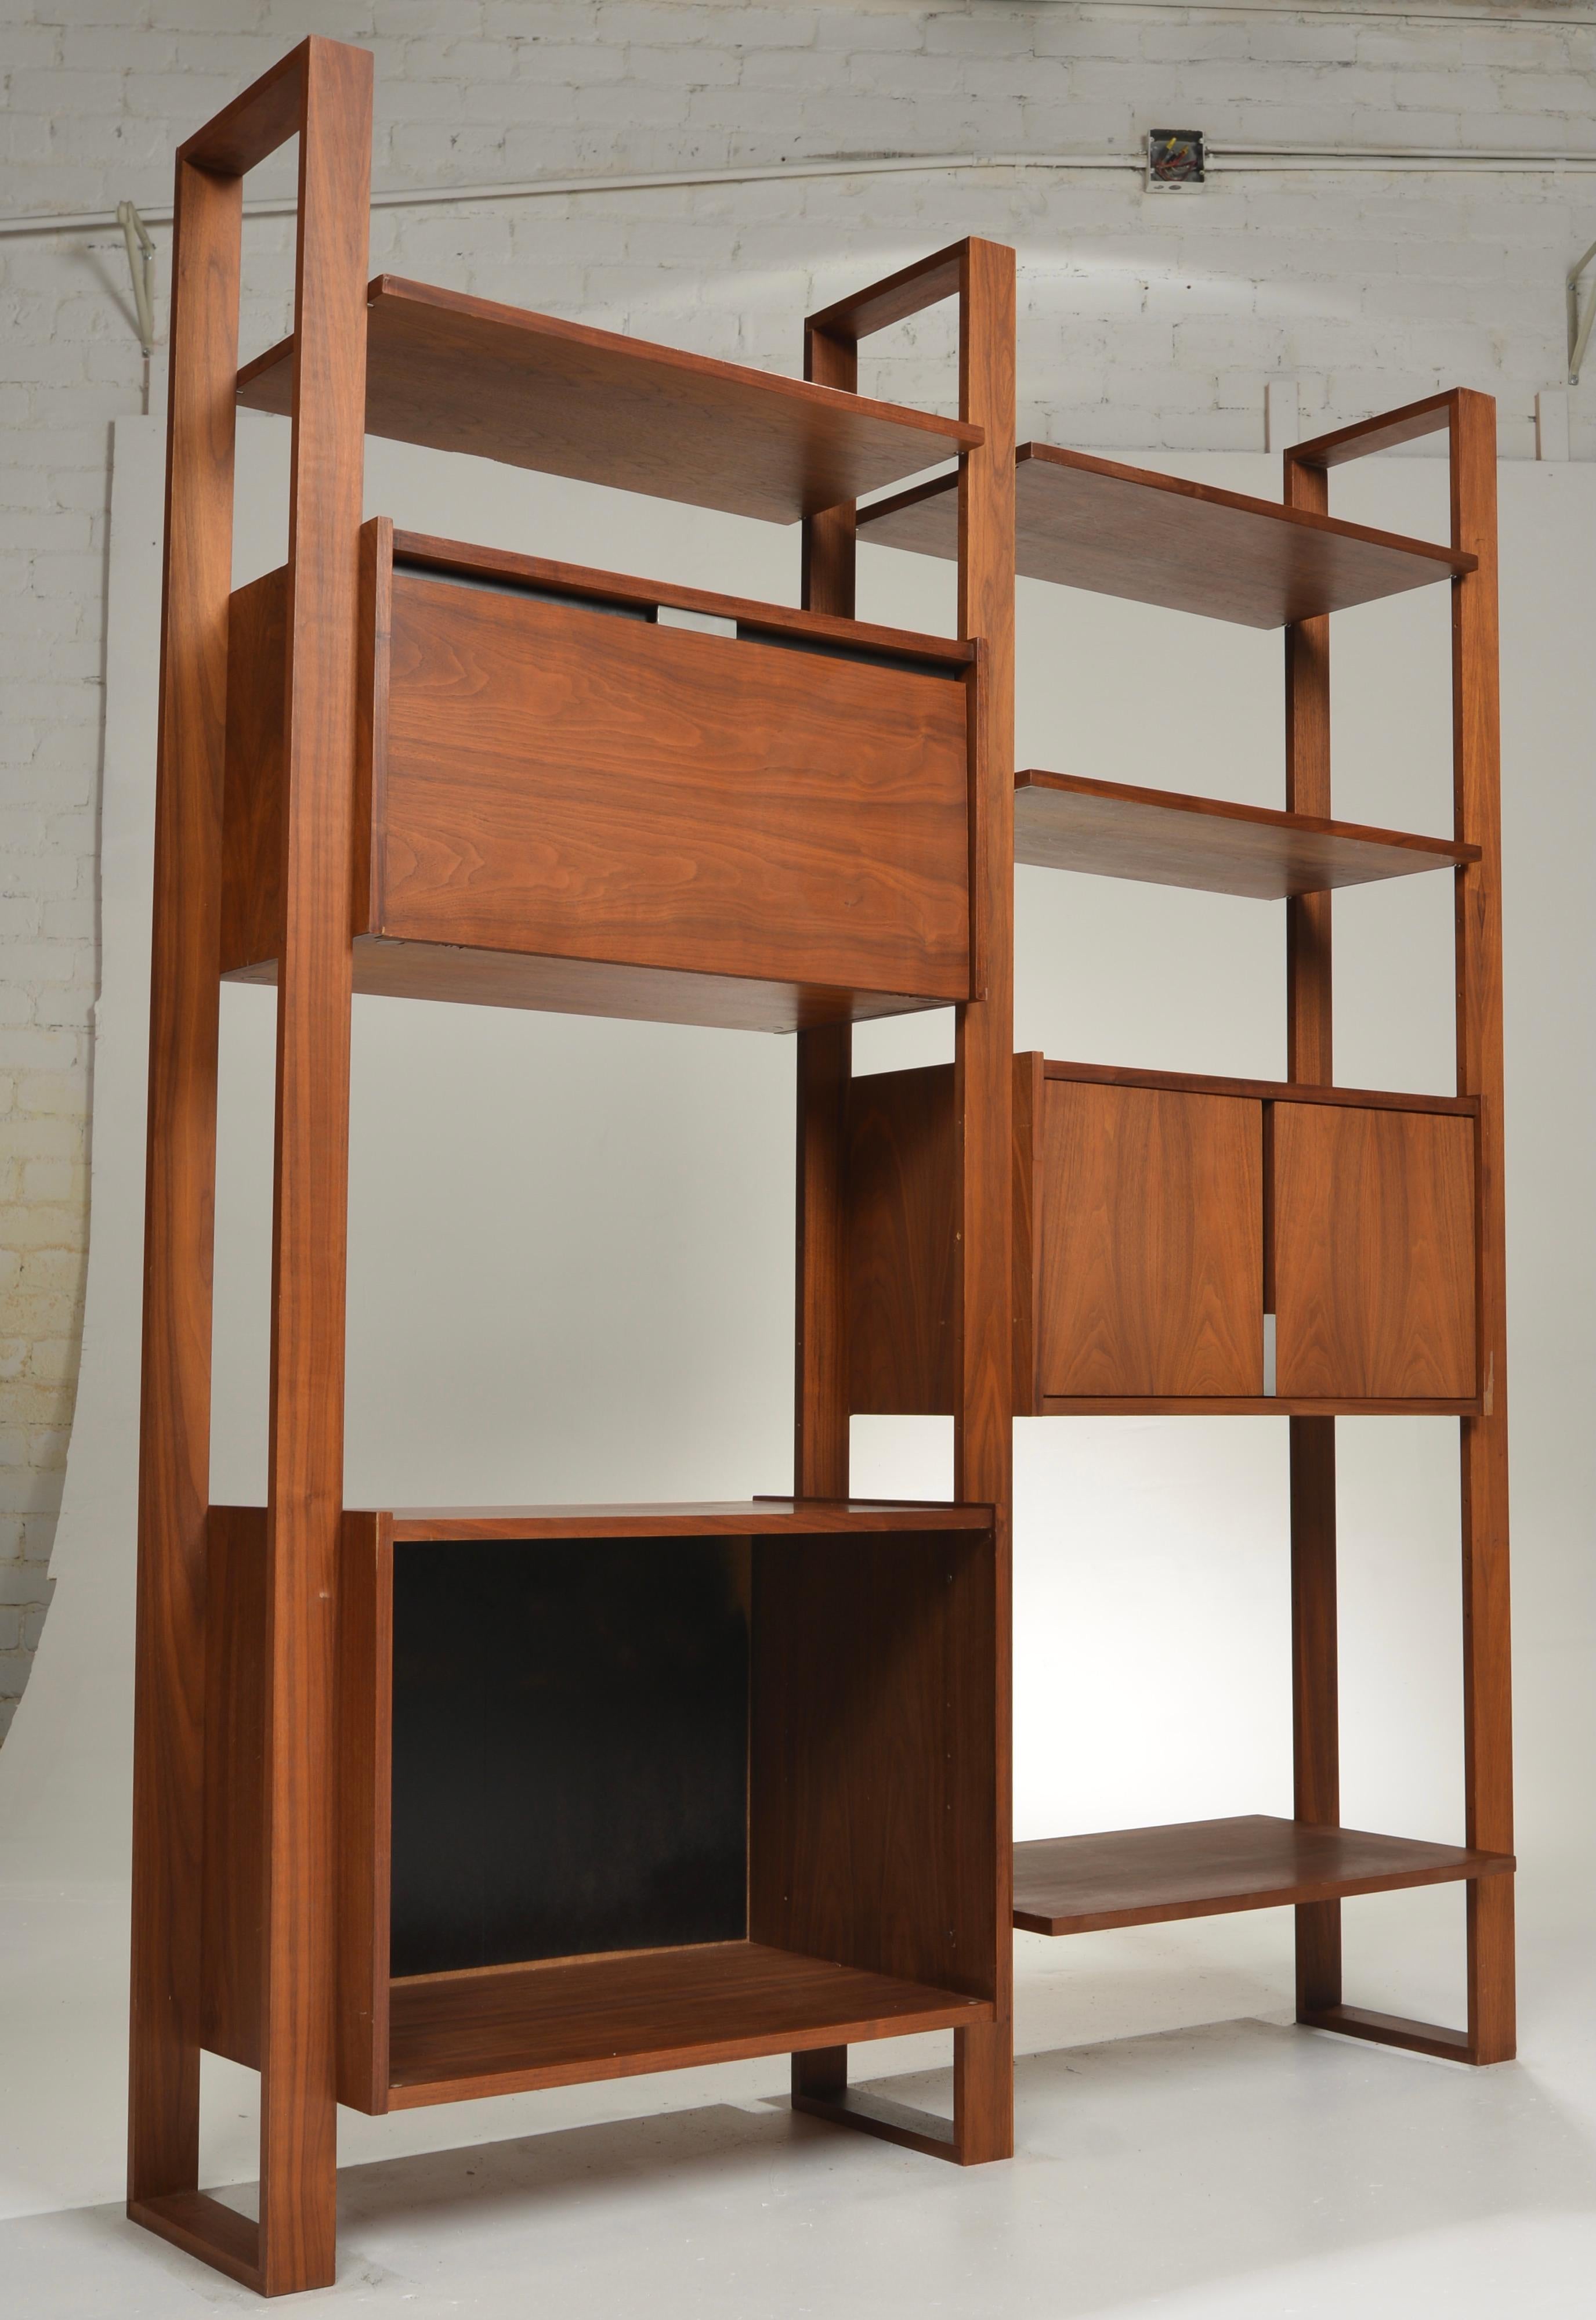 This is a beautifully crafted wall unit by Dillingham. The cabinets and shelves are modular and can be arranged as desired.